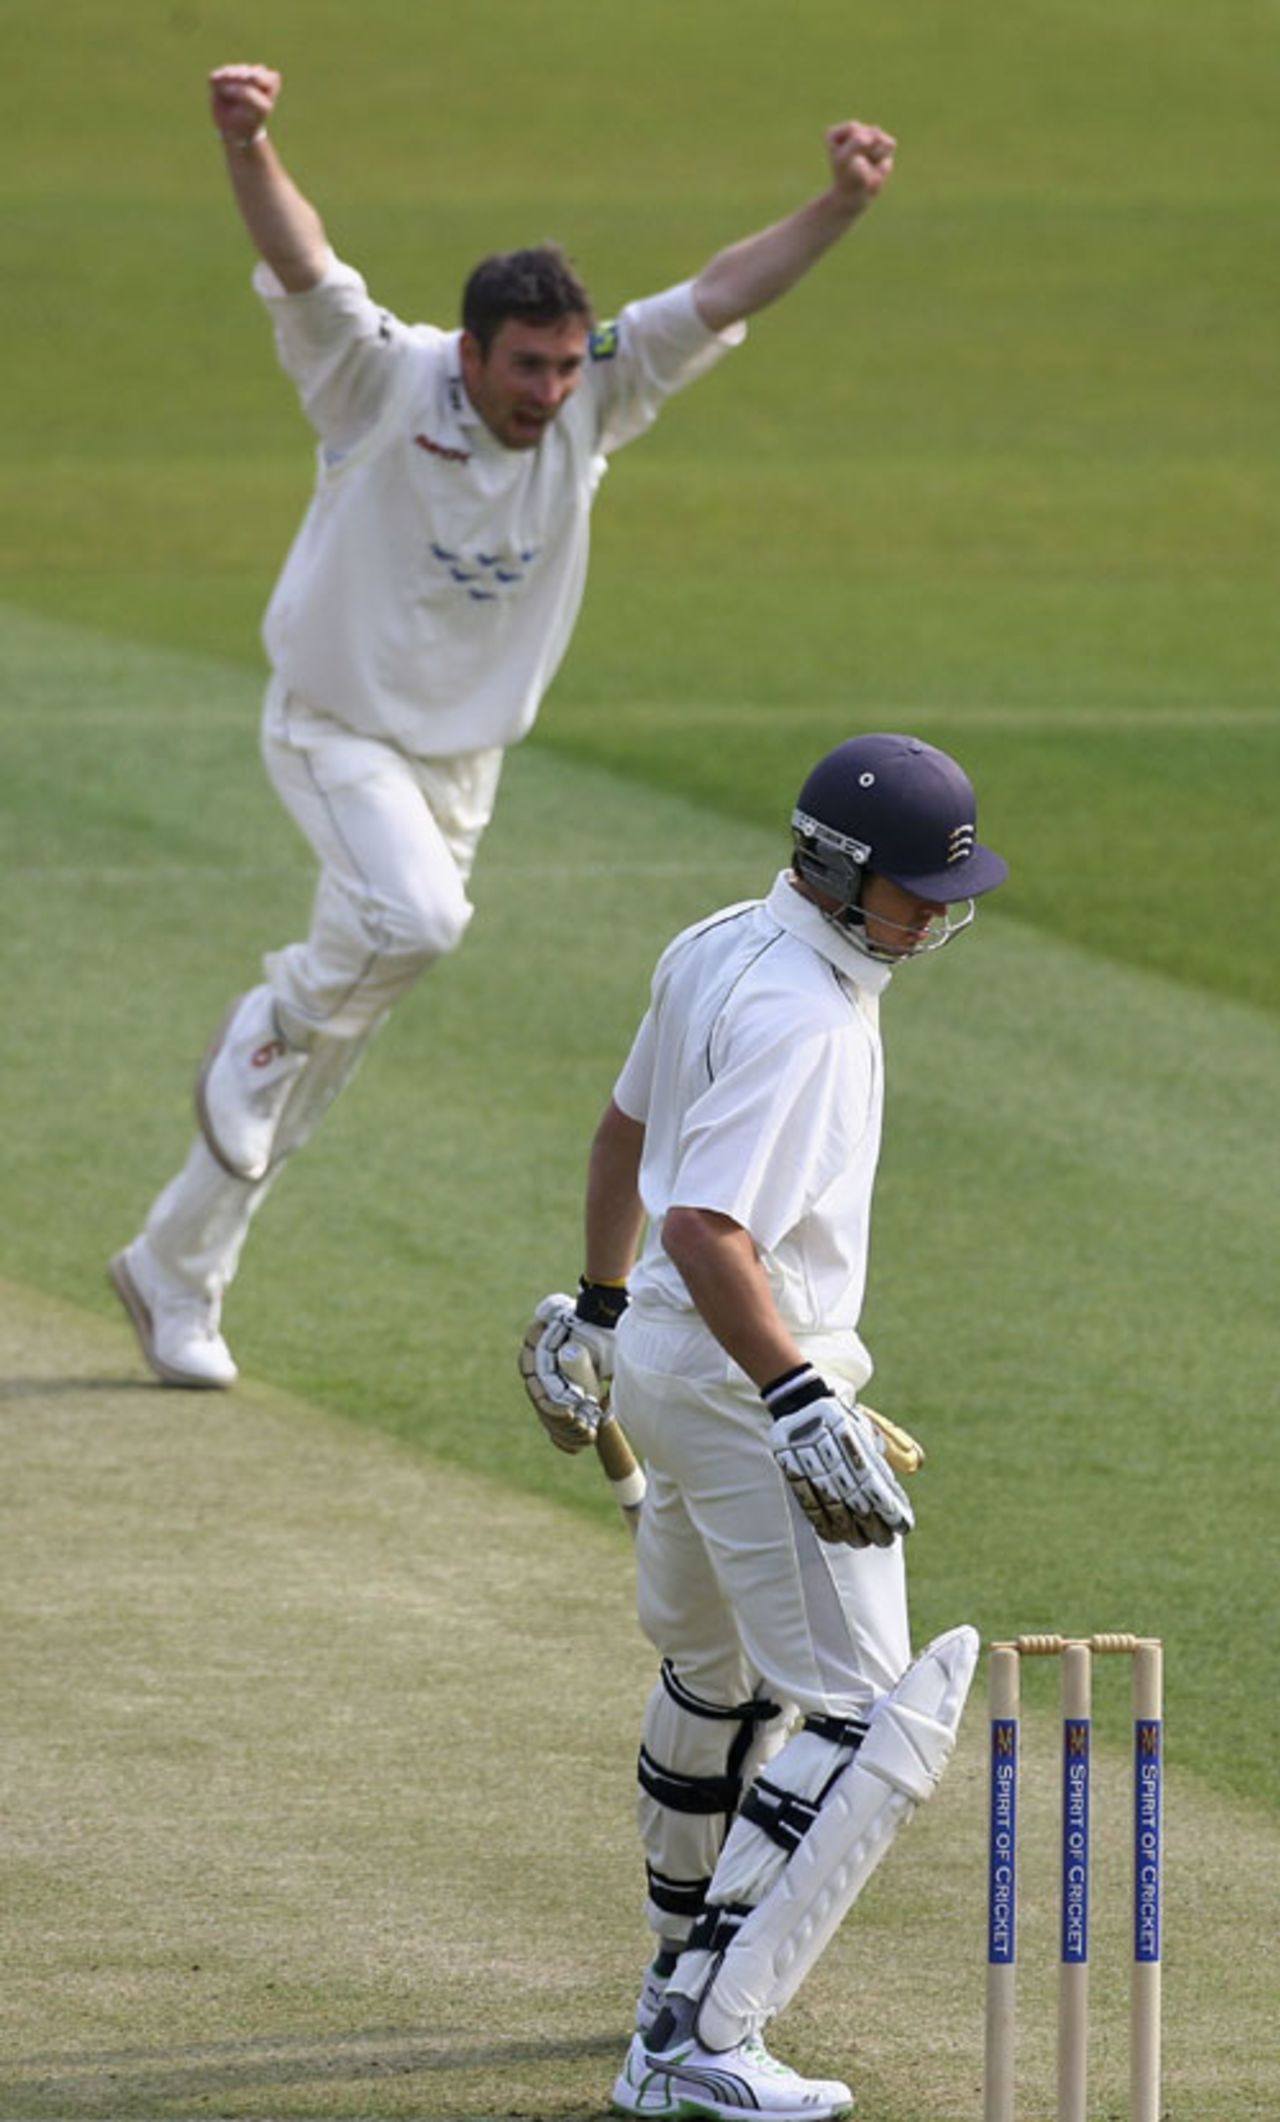 James Kirtley takes the first wicket of the season, Nick Compton records the first duck, MCC v Sussex, Lord's, April 13, 2007